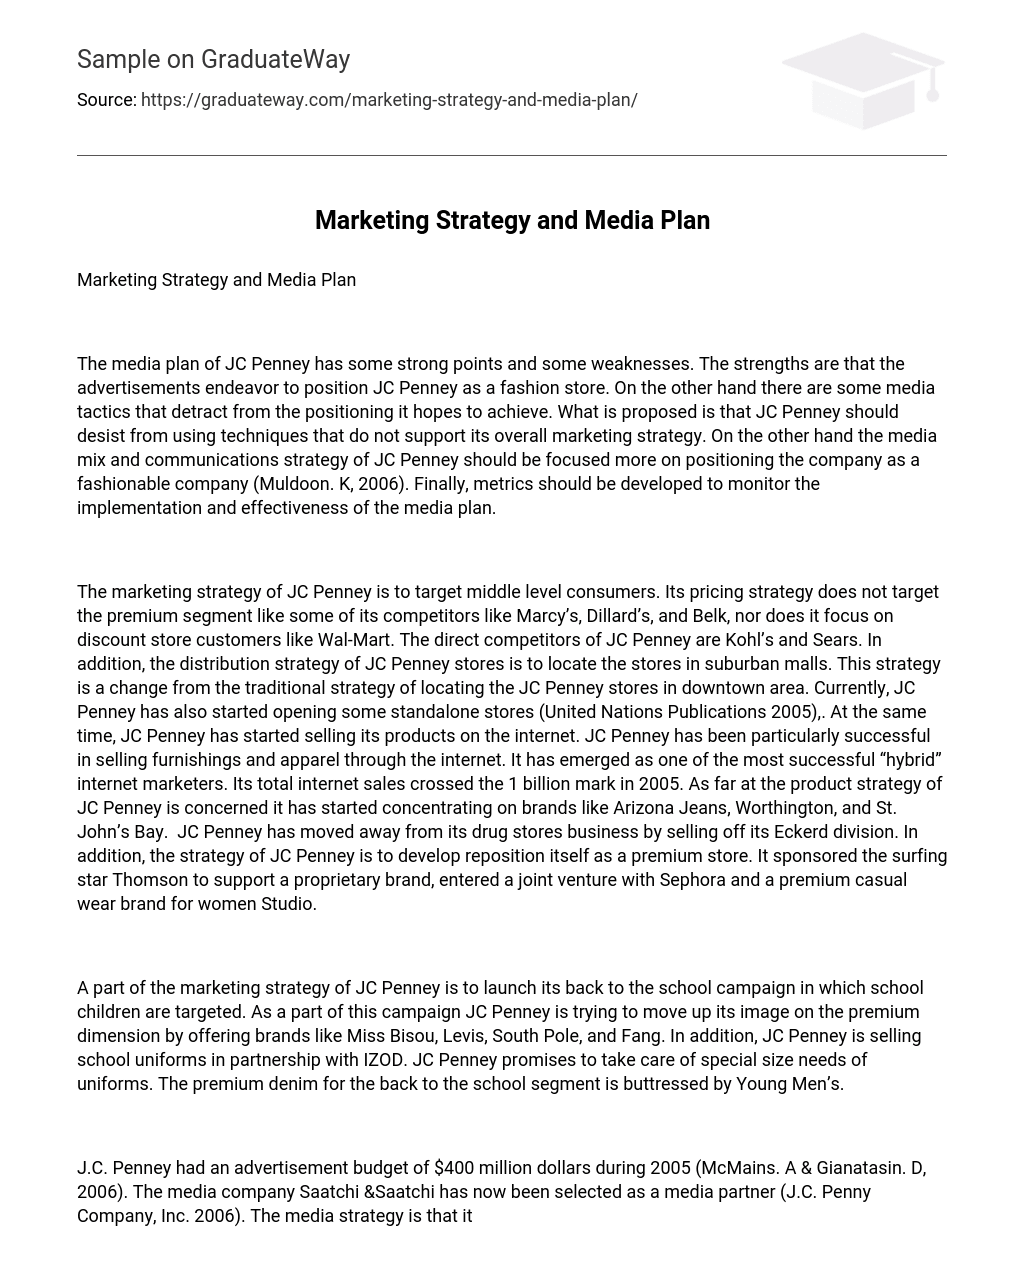 Marketing Strategy and Media Plan